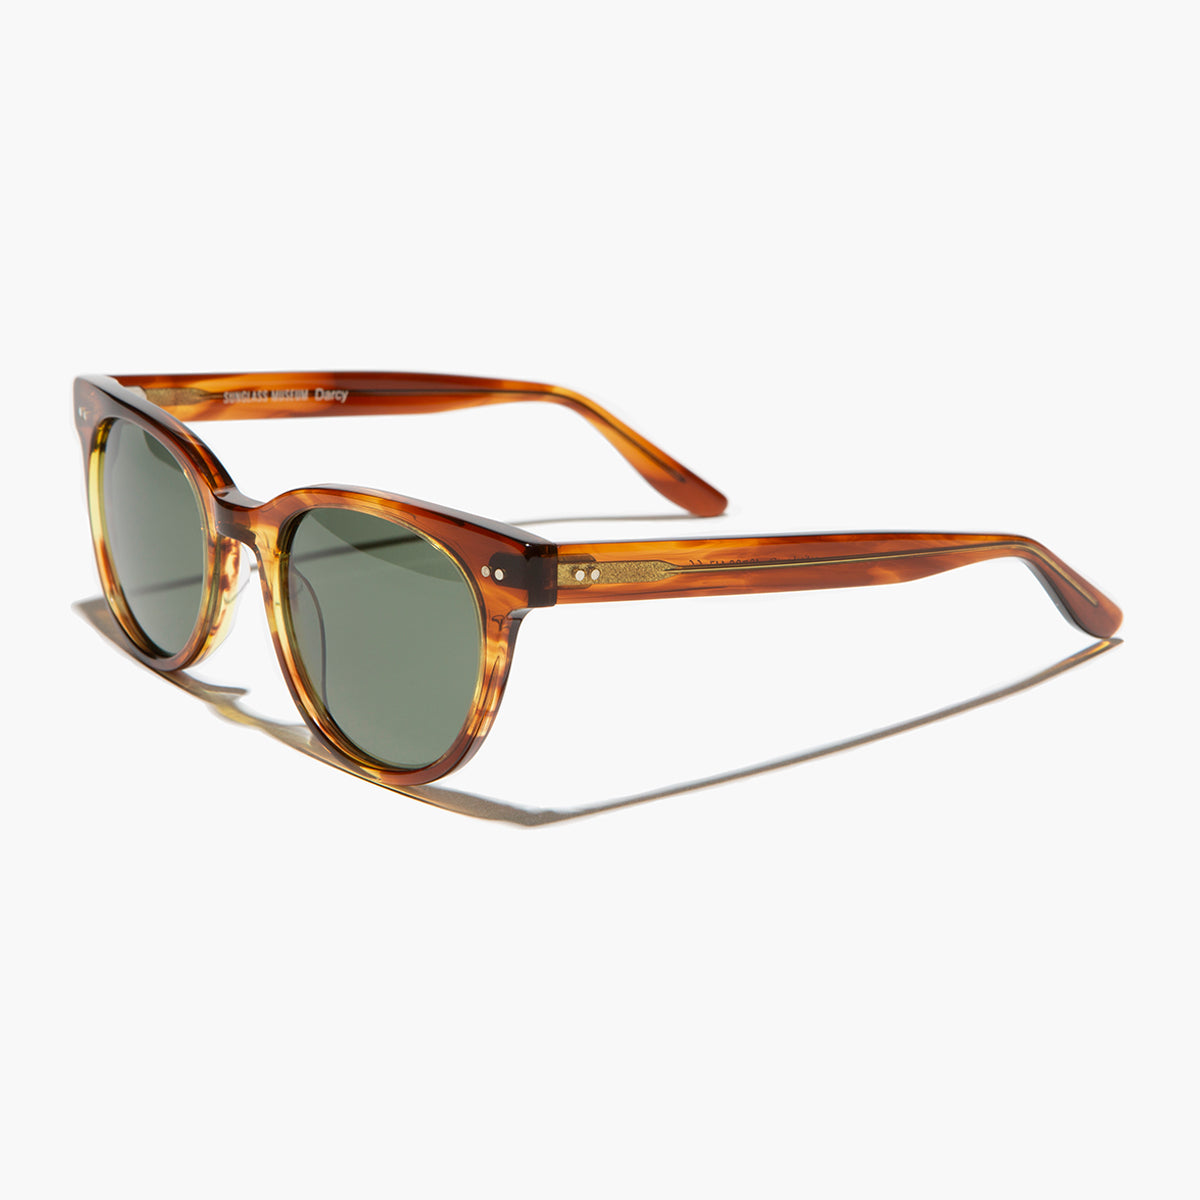 rounded square retro sunglass with polarized lenses